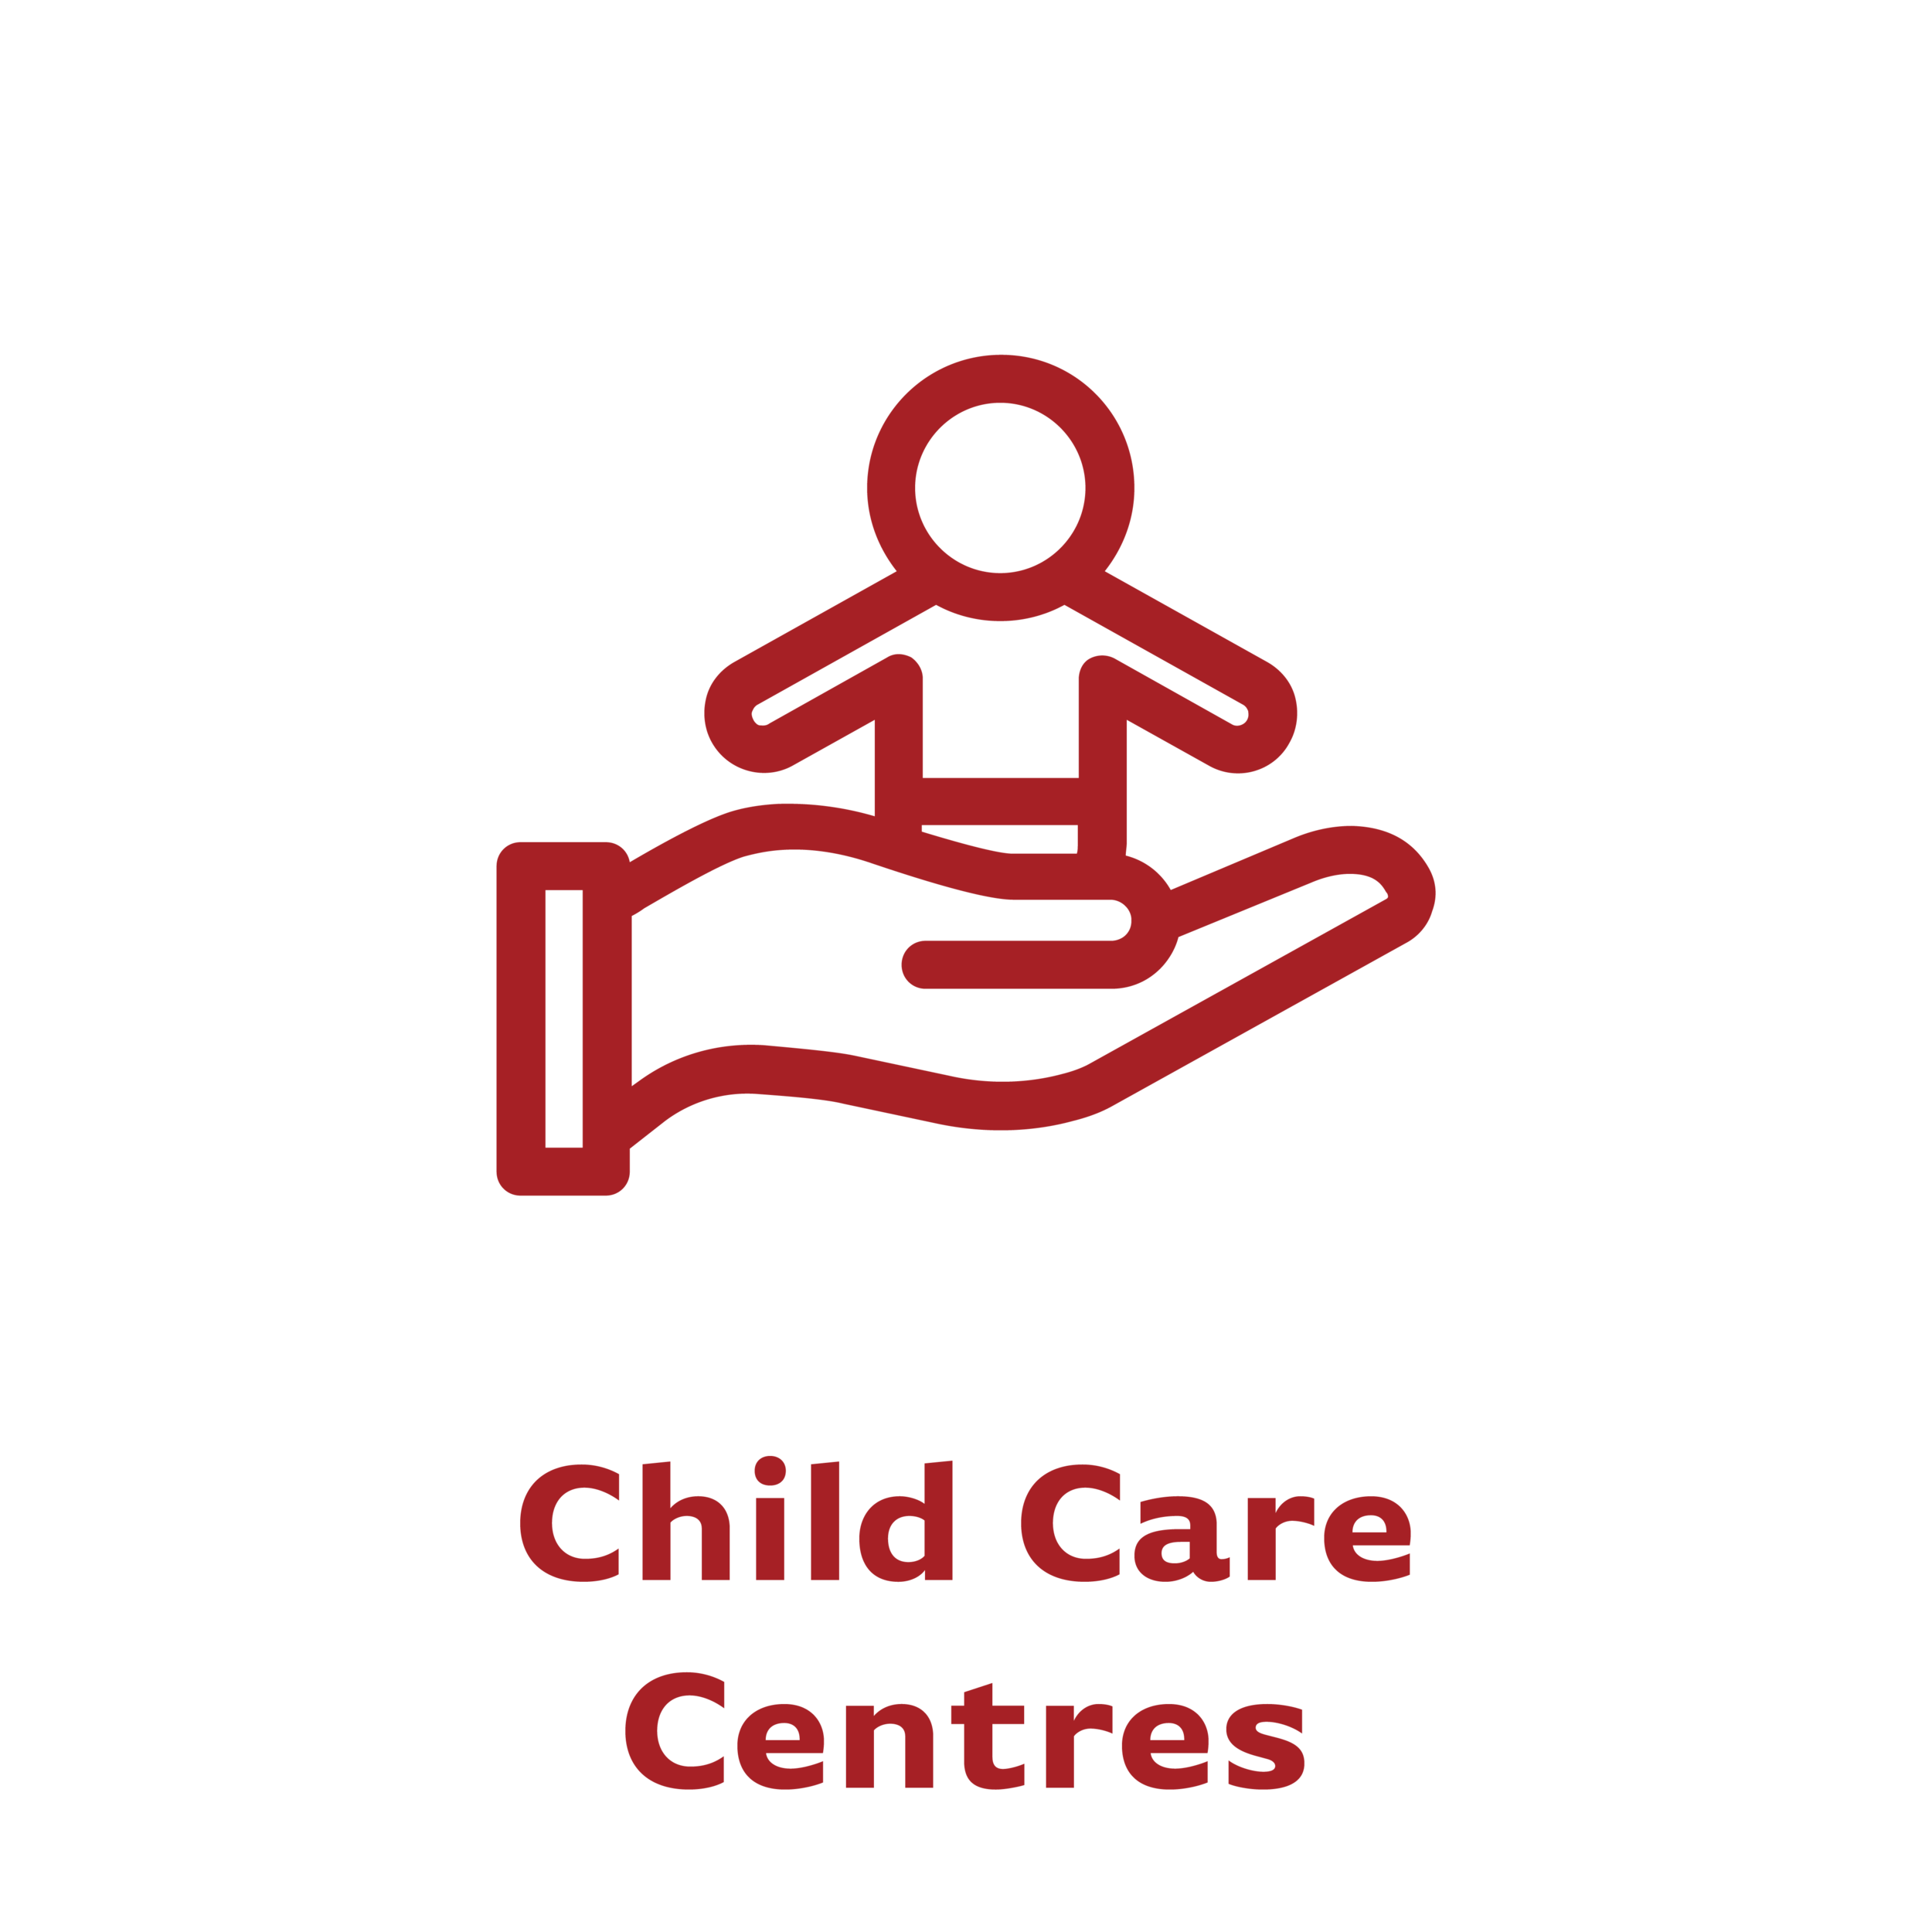 services_icons_Child care centres.png